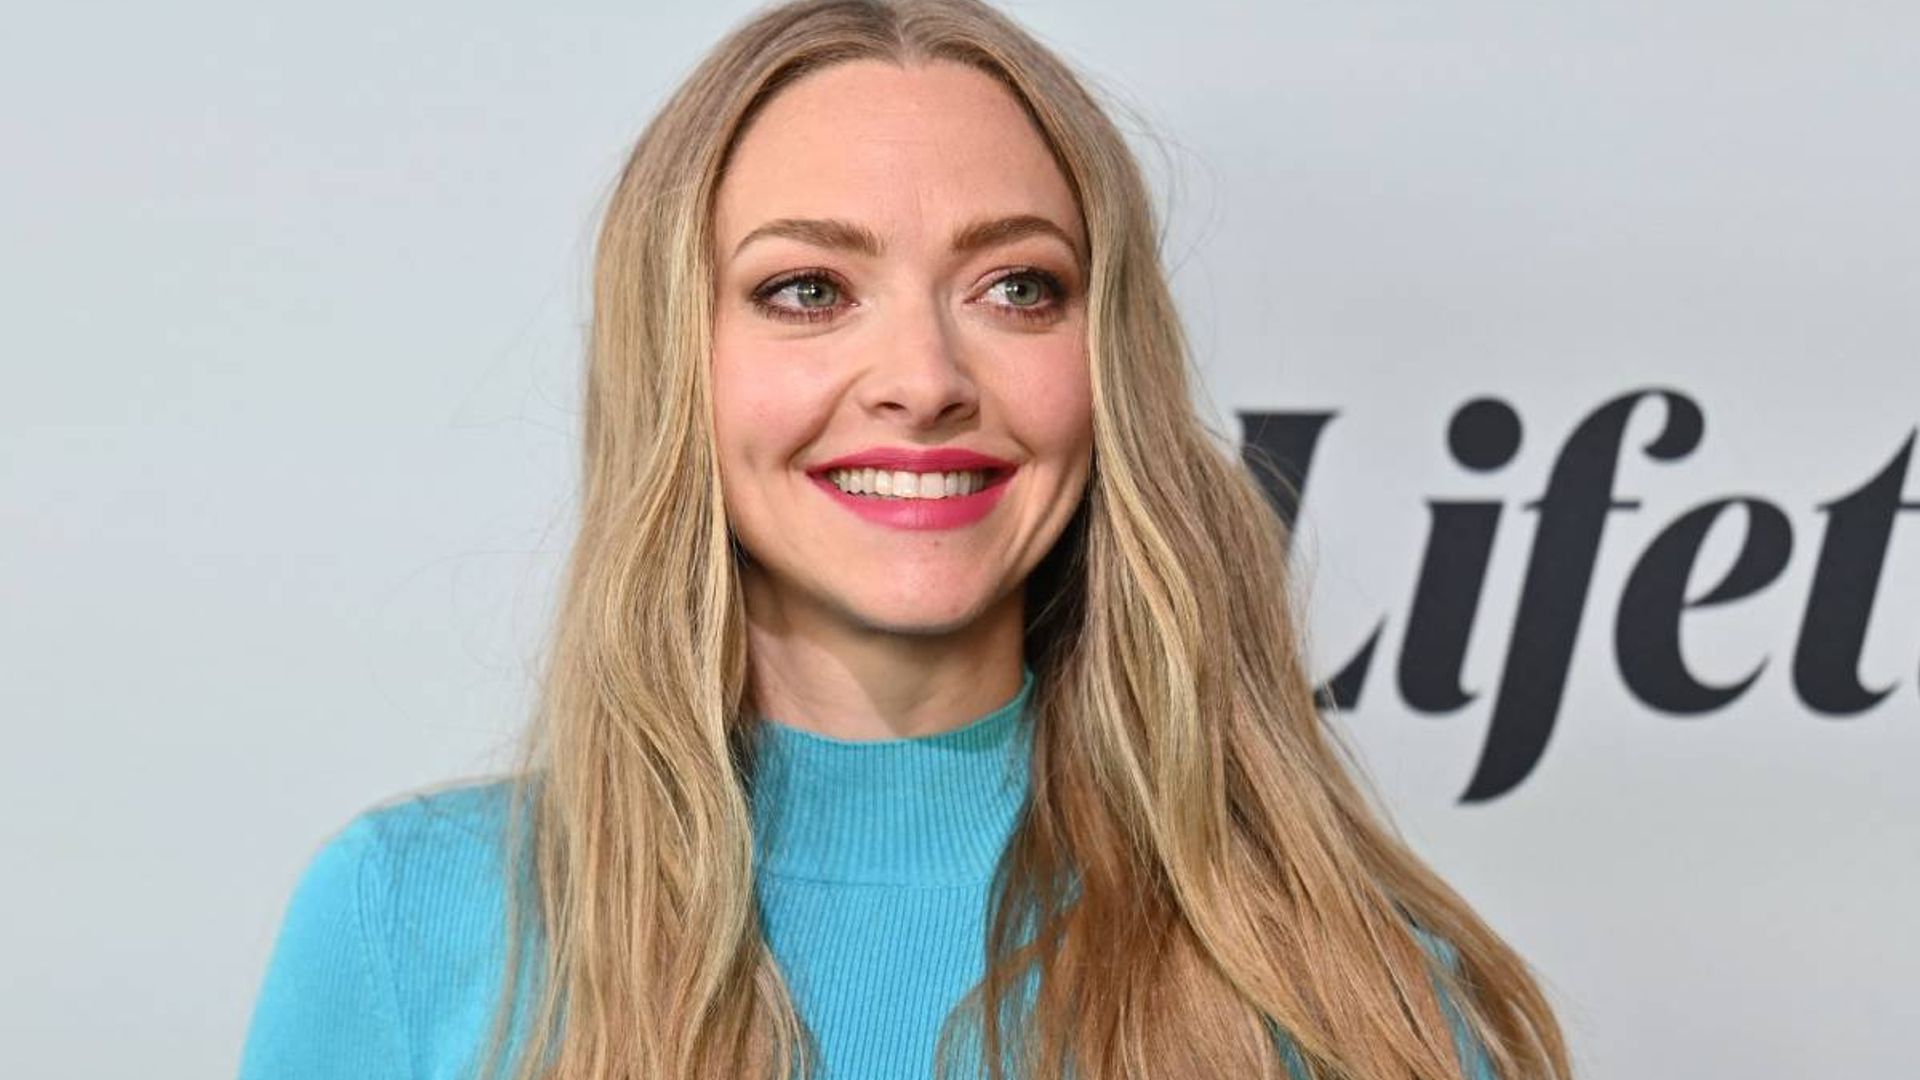 Amanda Seyfried shares stunning portrait of her daughter Nina - and fans are seeing double